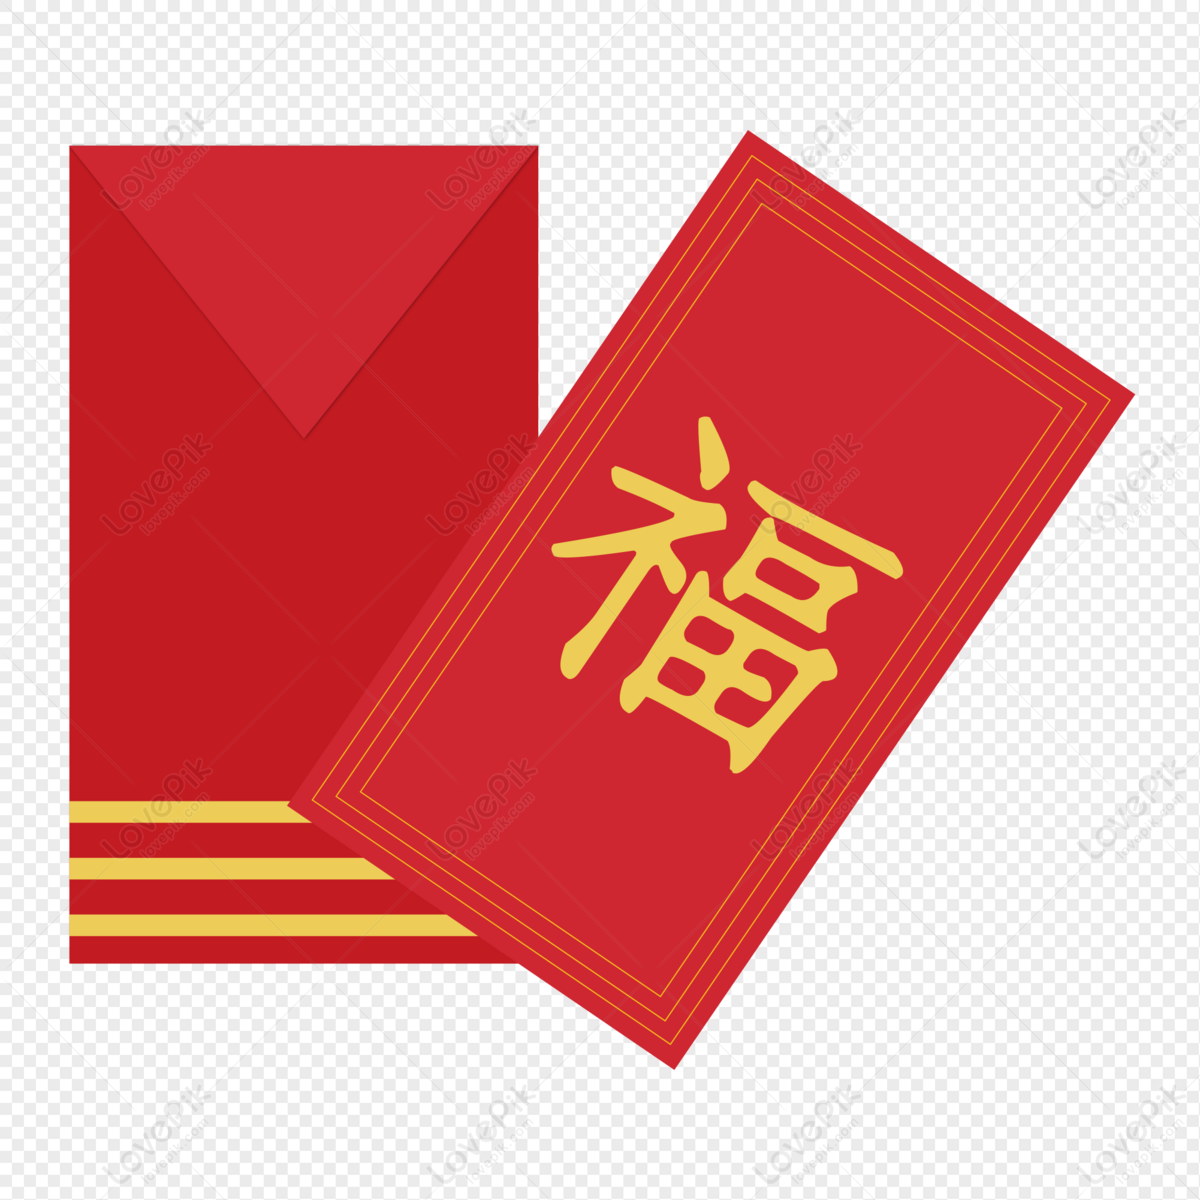 Soft Red Envelope PNG Clipart​  Gallery Yopriceville - High-Quality Free  Images and Transparent PNG Clipart